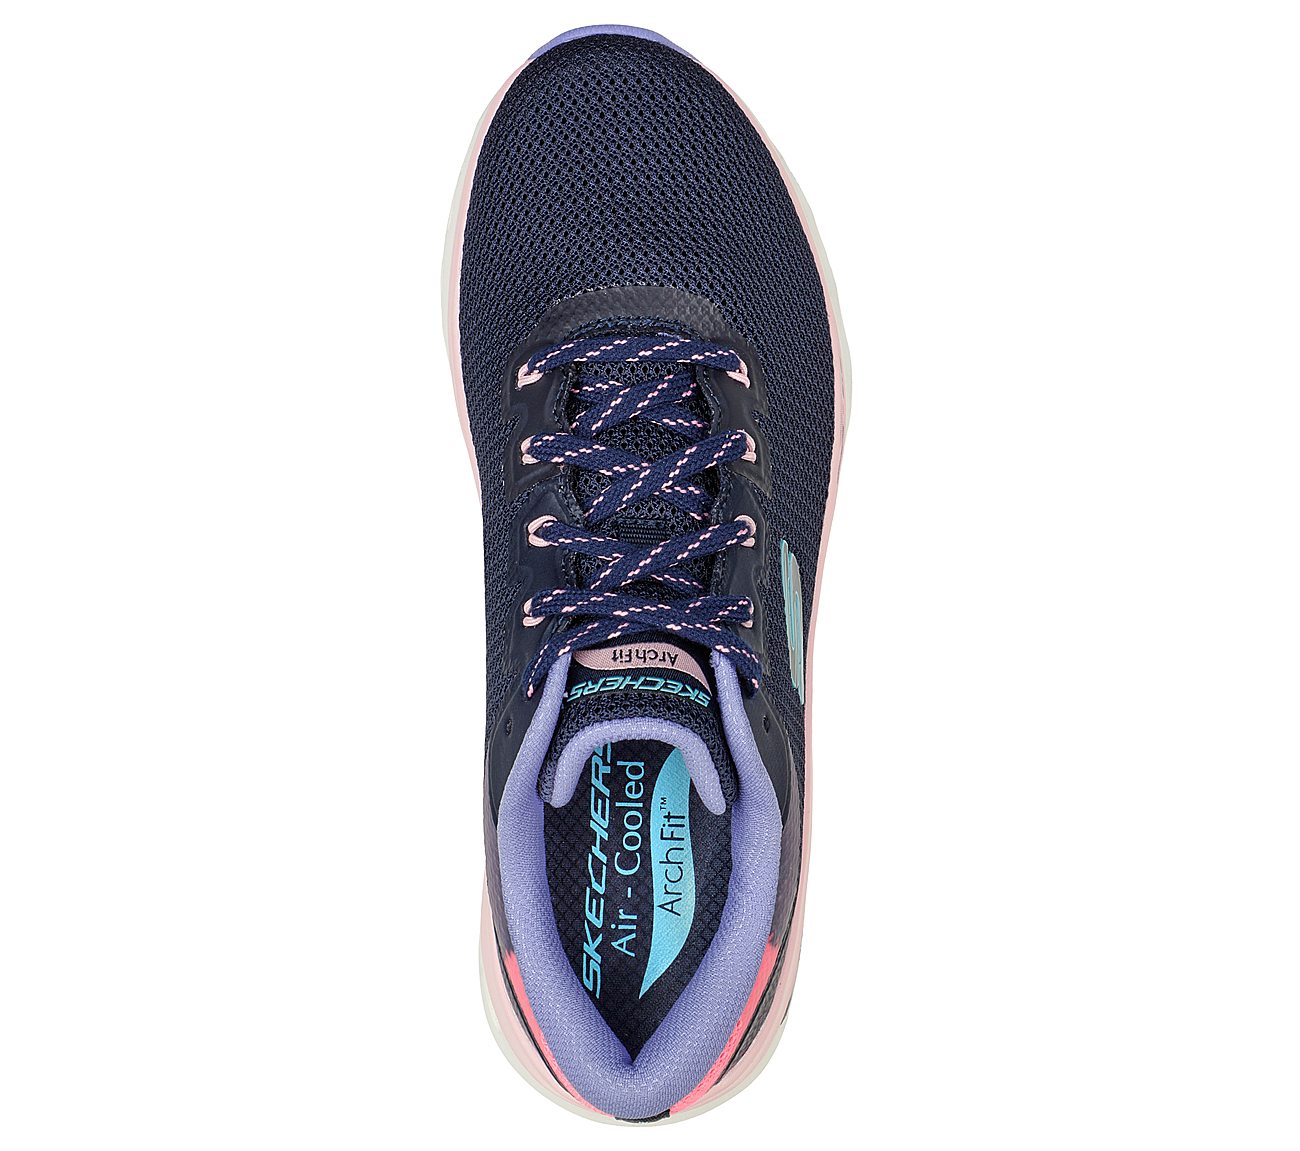 ARCH FIT GLIDE-STEP-HIGHLIGHT, NAVY/MULTI Footwear Top View